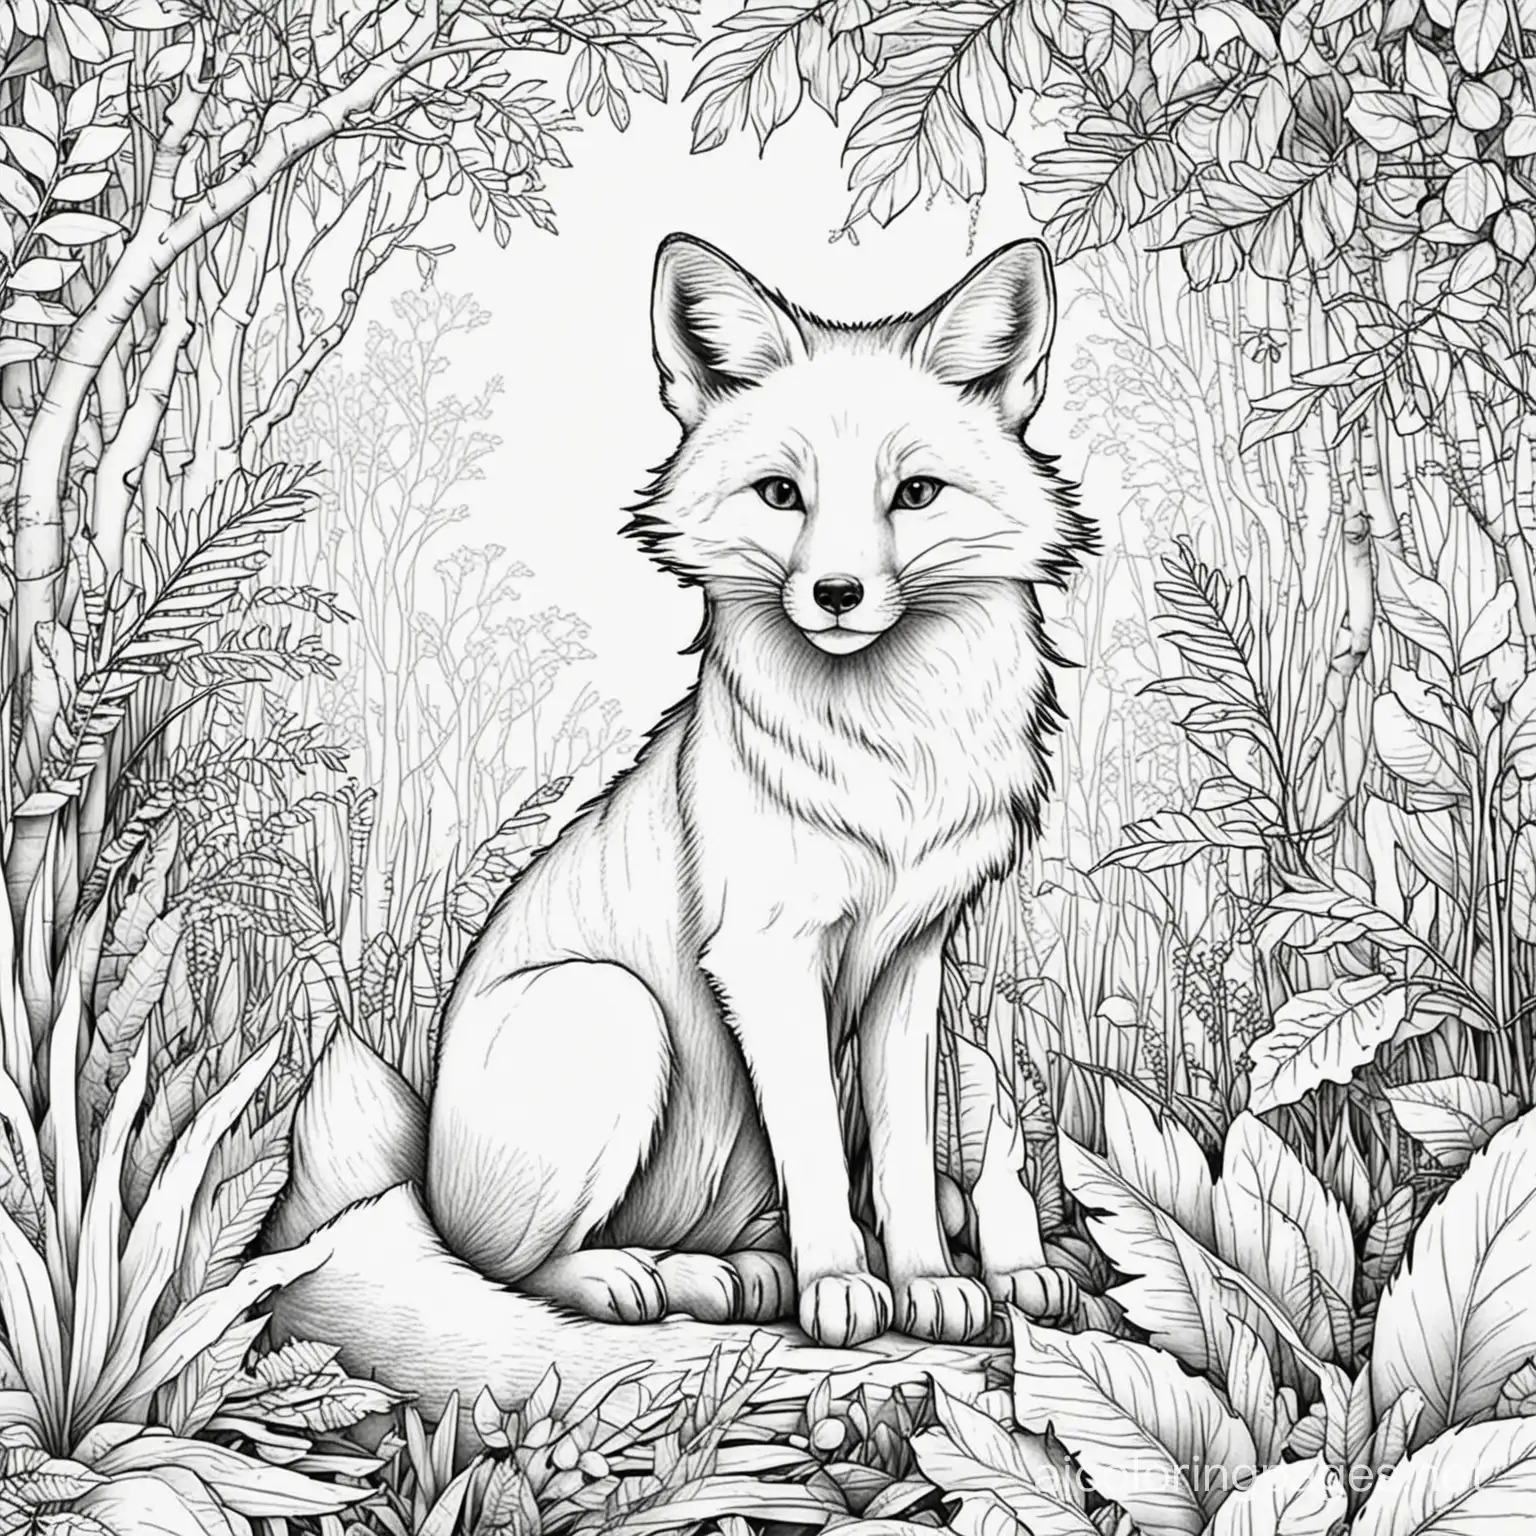 Fox-and-Cub-Jungle-Coloring-Page-Black-and-White-Line-Art-for-Kids